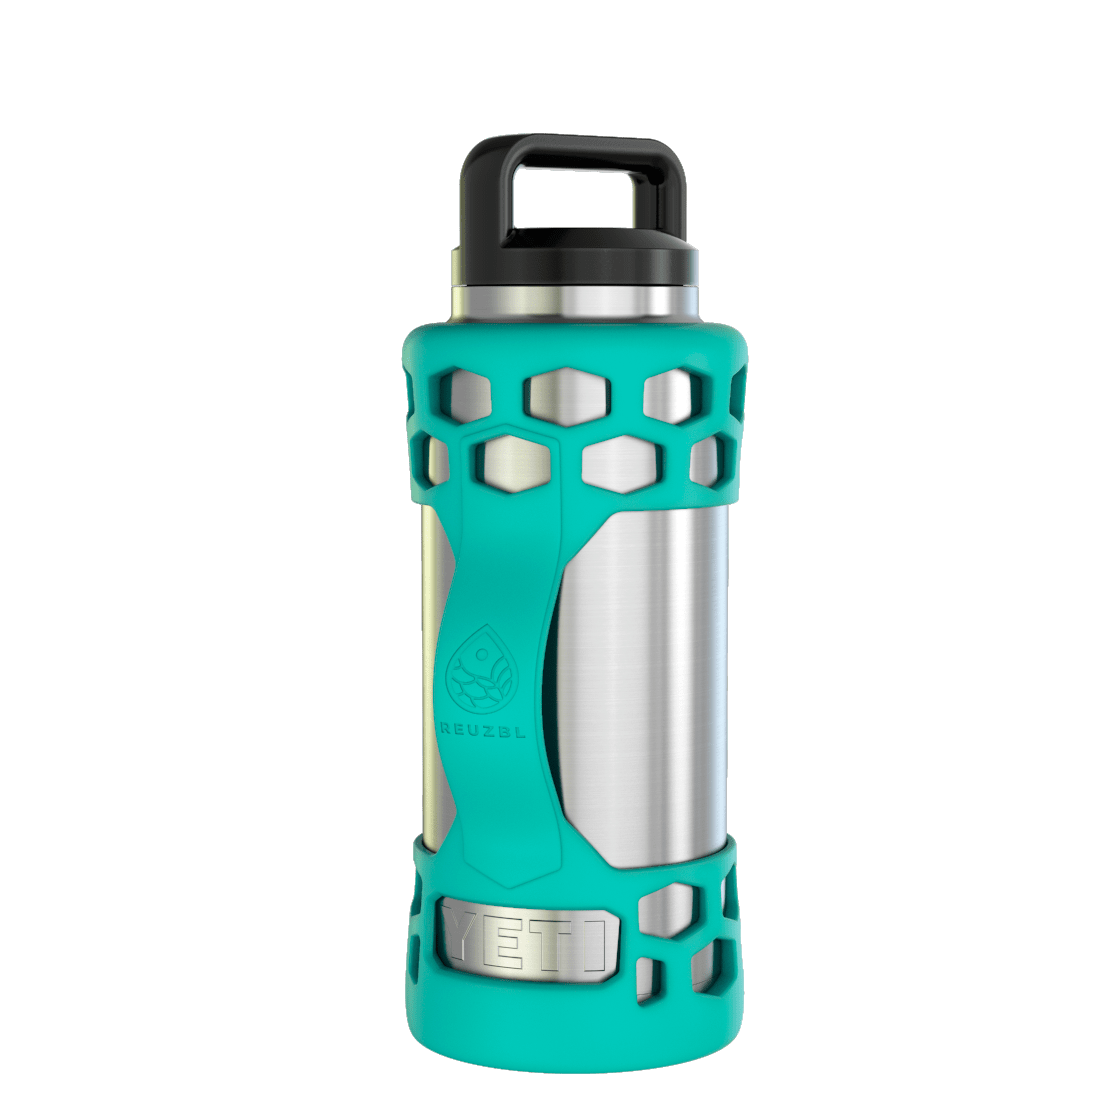 REUZBL Bottle Bumper Silicone Sleeve Protector with Handle for